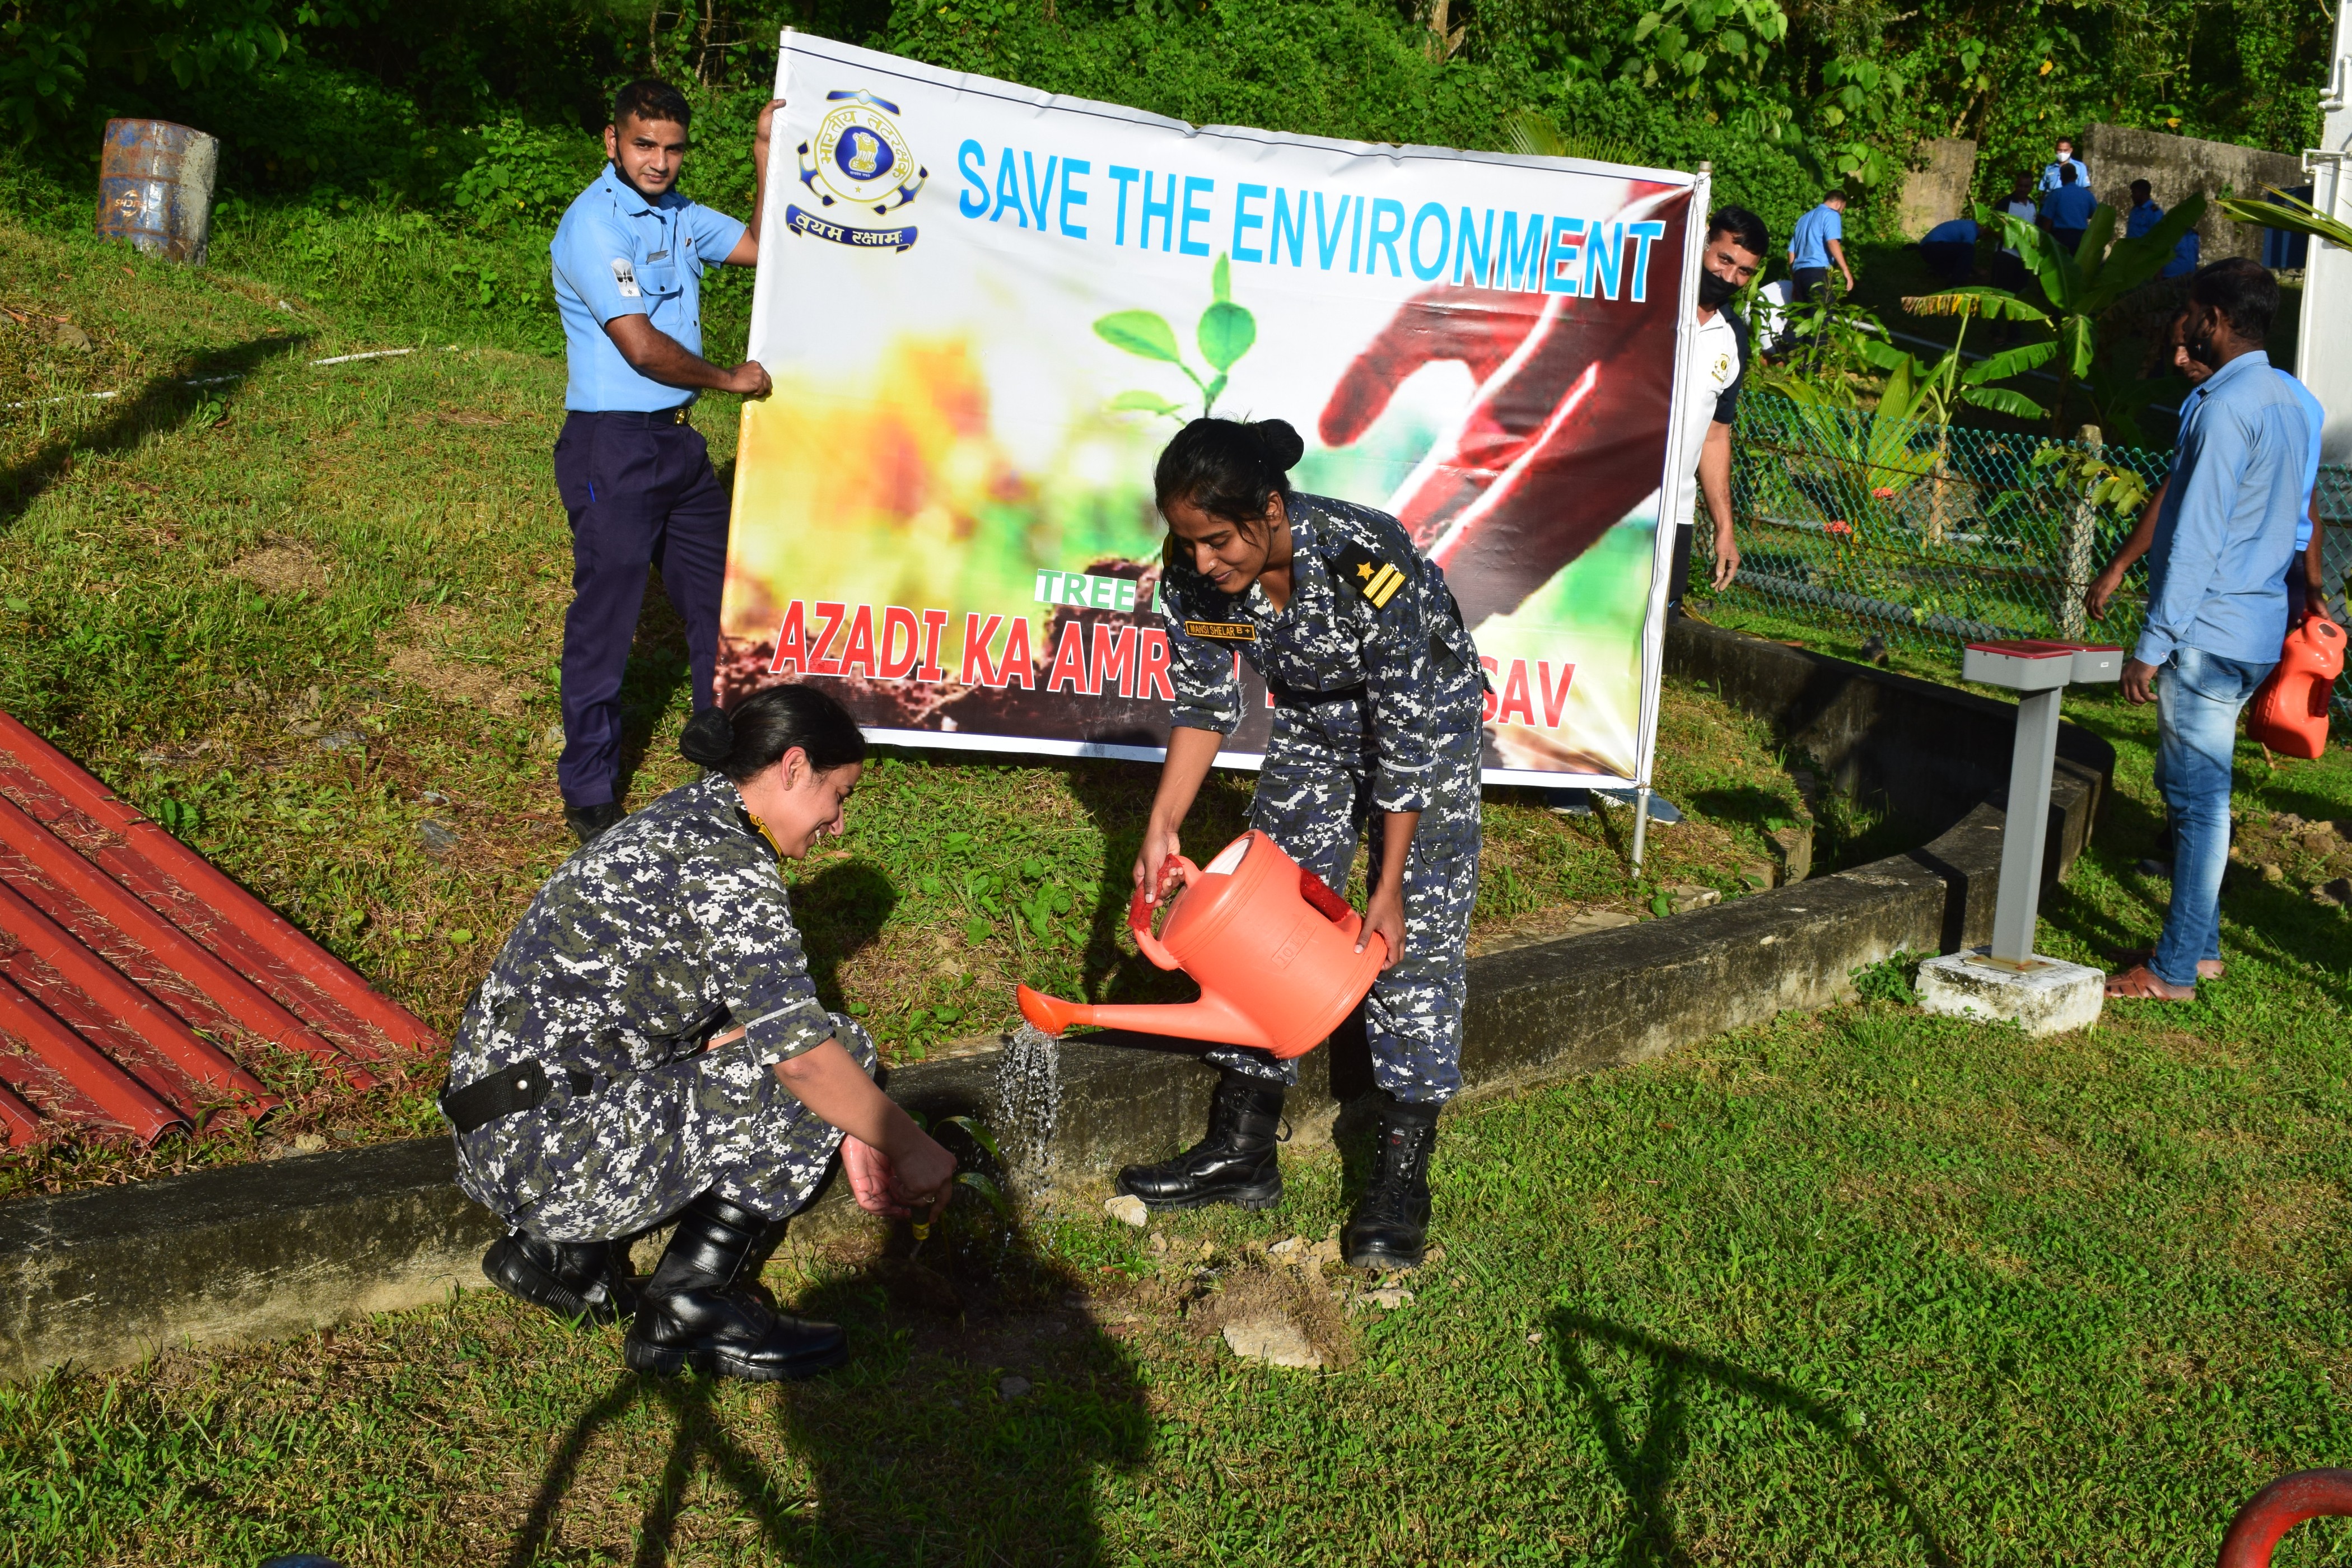 Tree plantation drive conducted by the staff of Indian Coast Guard to protect the environment. Varieties of trees planted during drive. The drive was conducted as a part of Azadi ka Amrit Mahotsav.